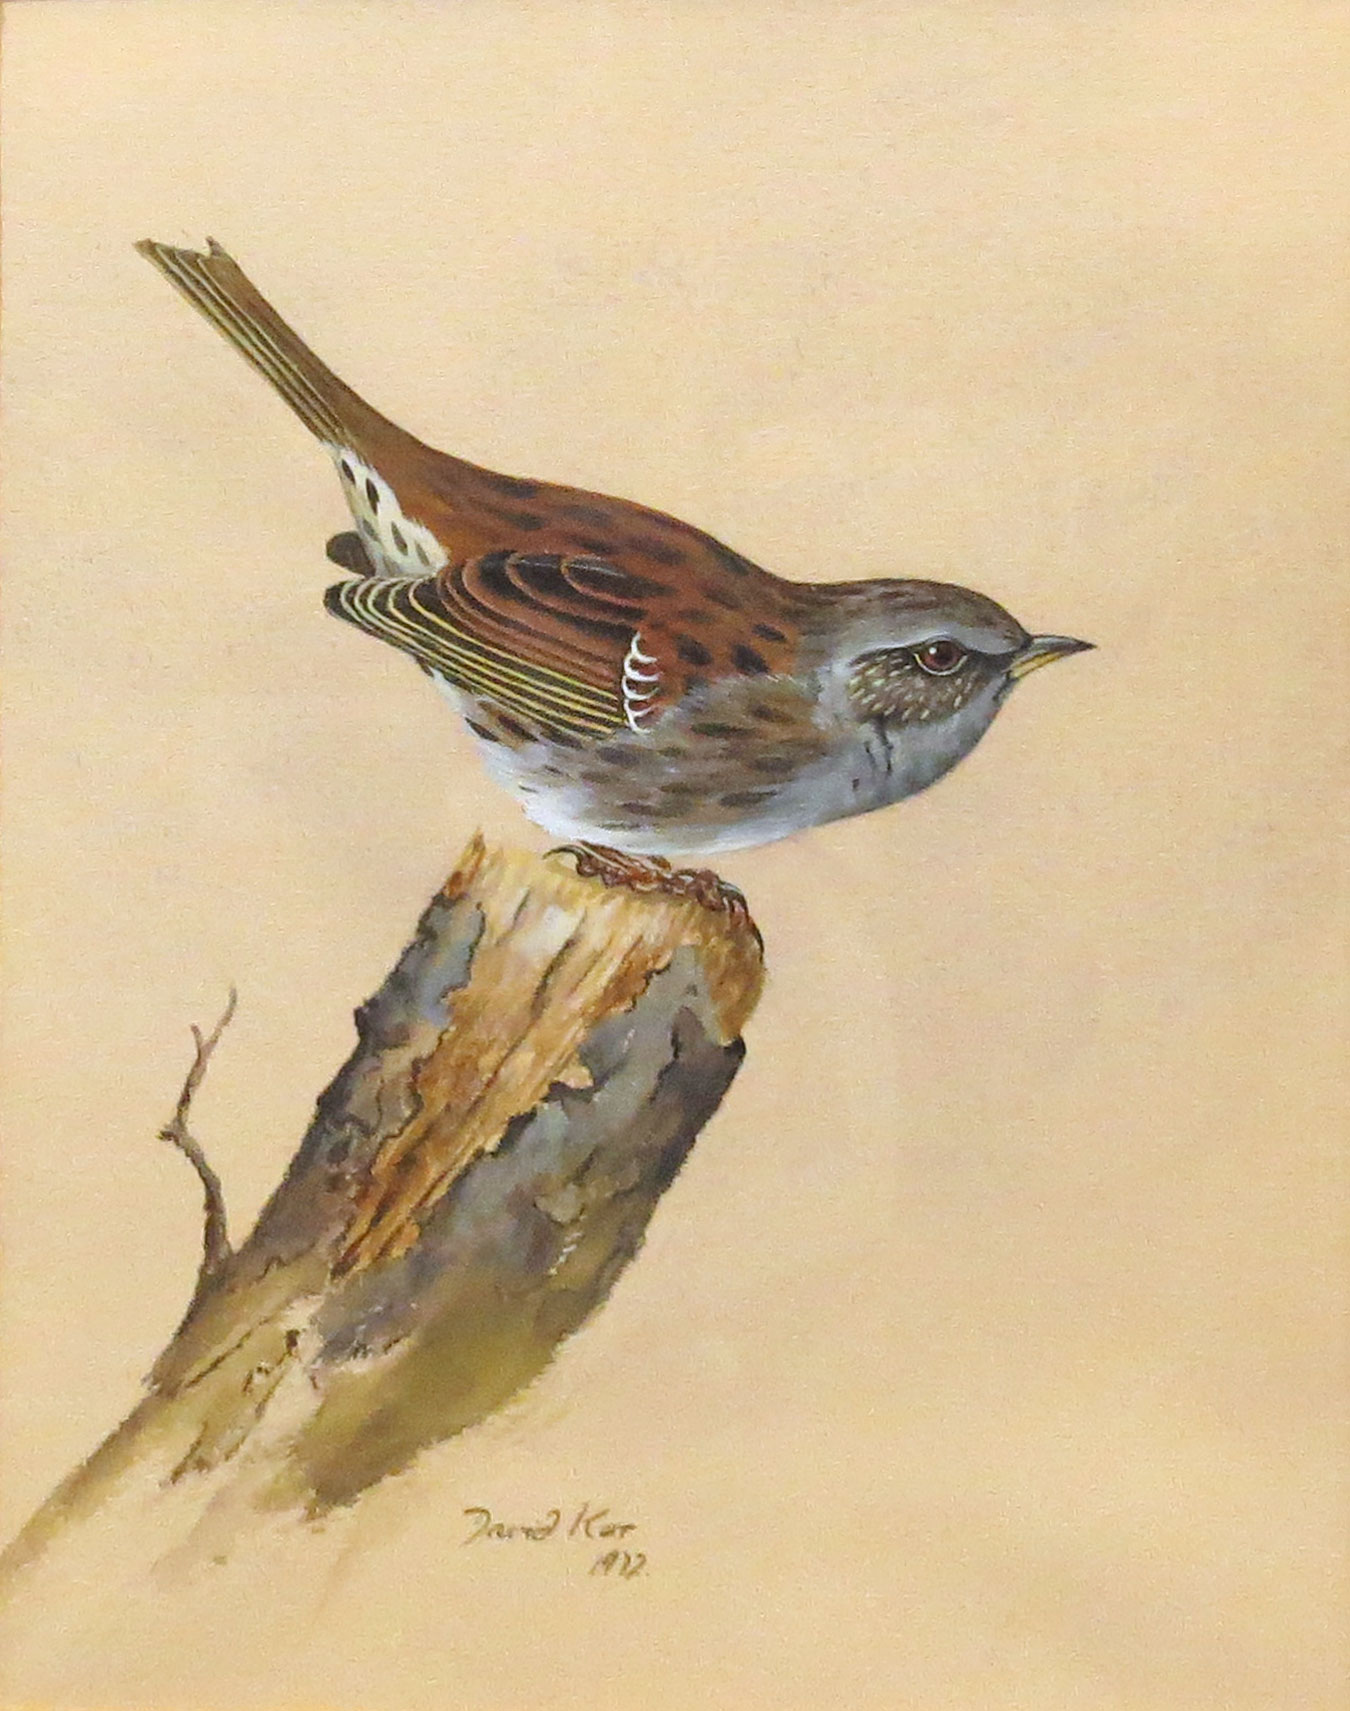 David Ord Kerr (born 1951), "Dunnock", watercolour, signed and dated 1972 lower centre, 18 x 15cm